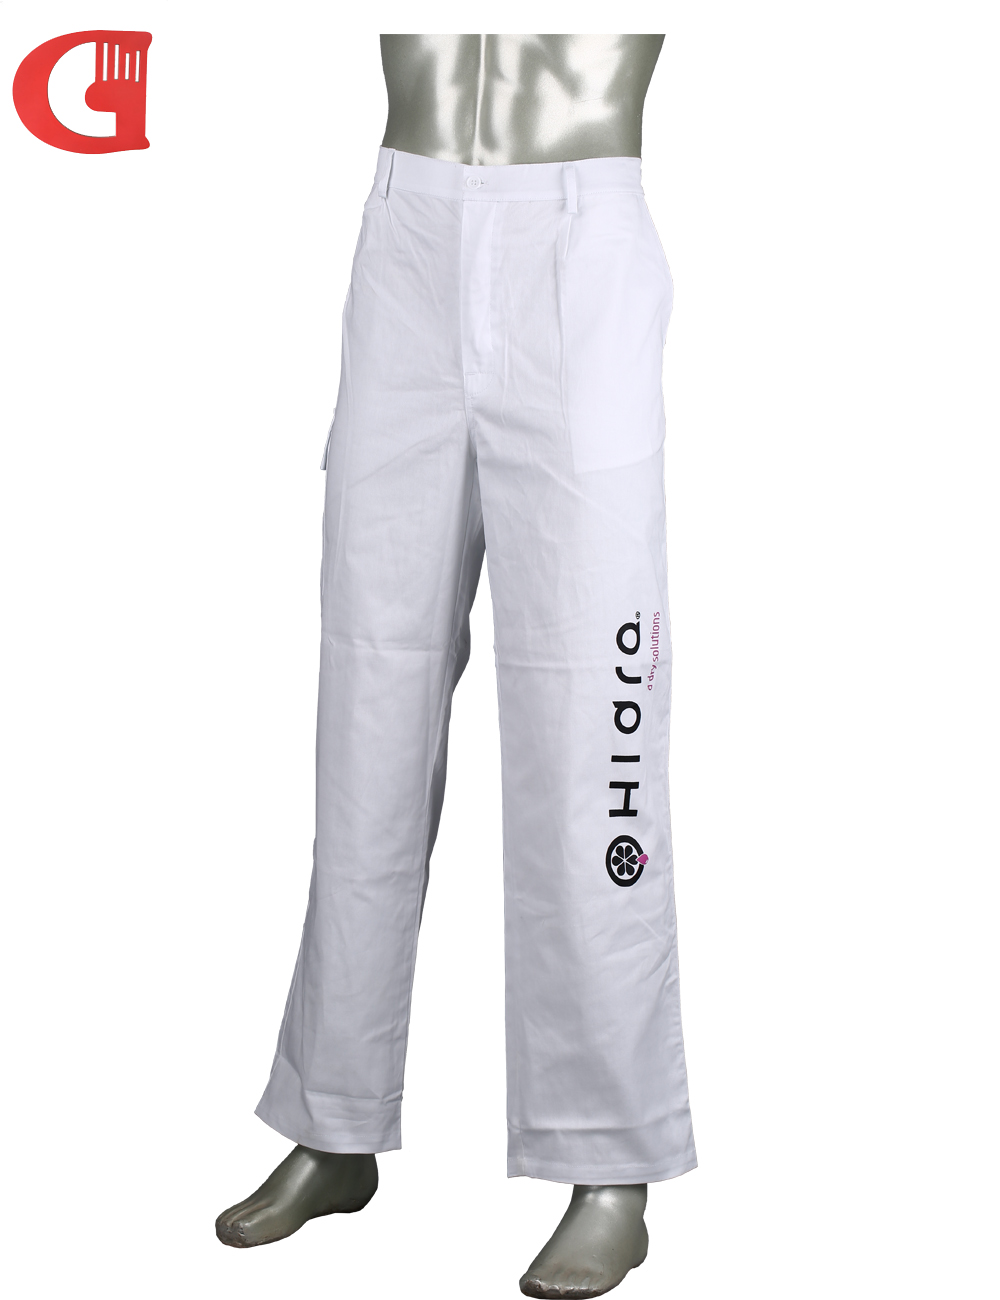 High Quality Work Trousers 100%Cotton Workwear  Work Pants